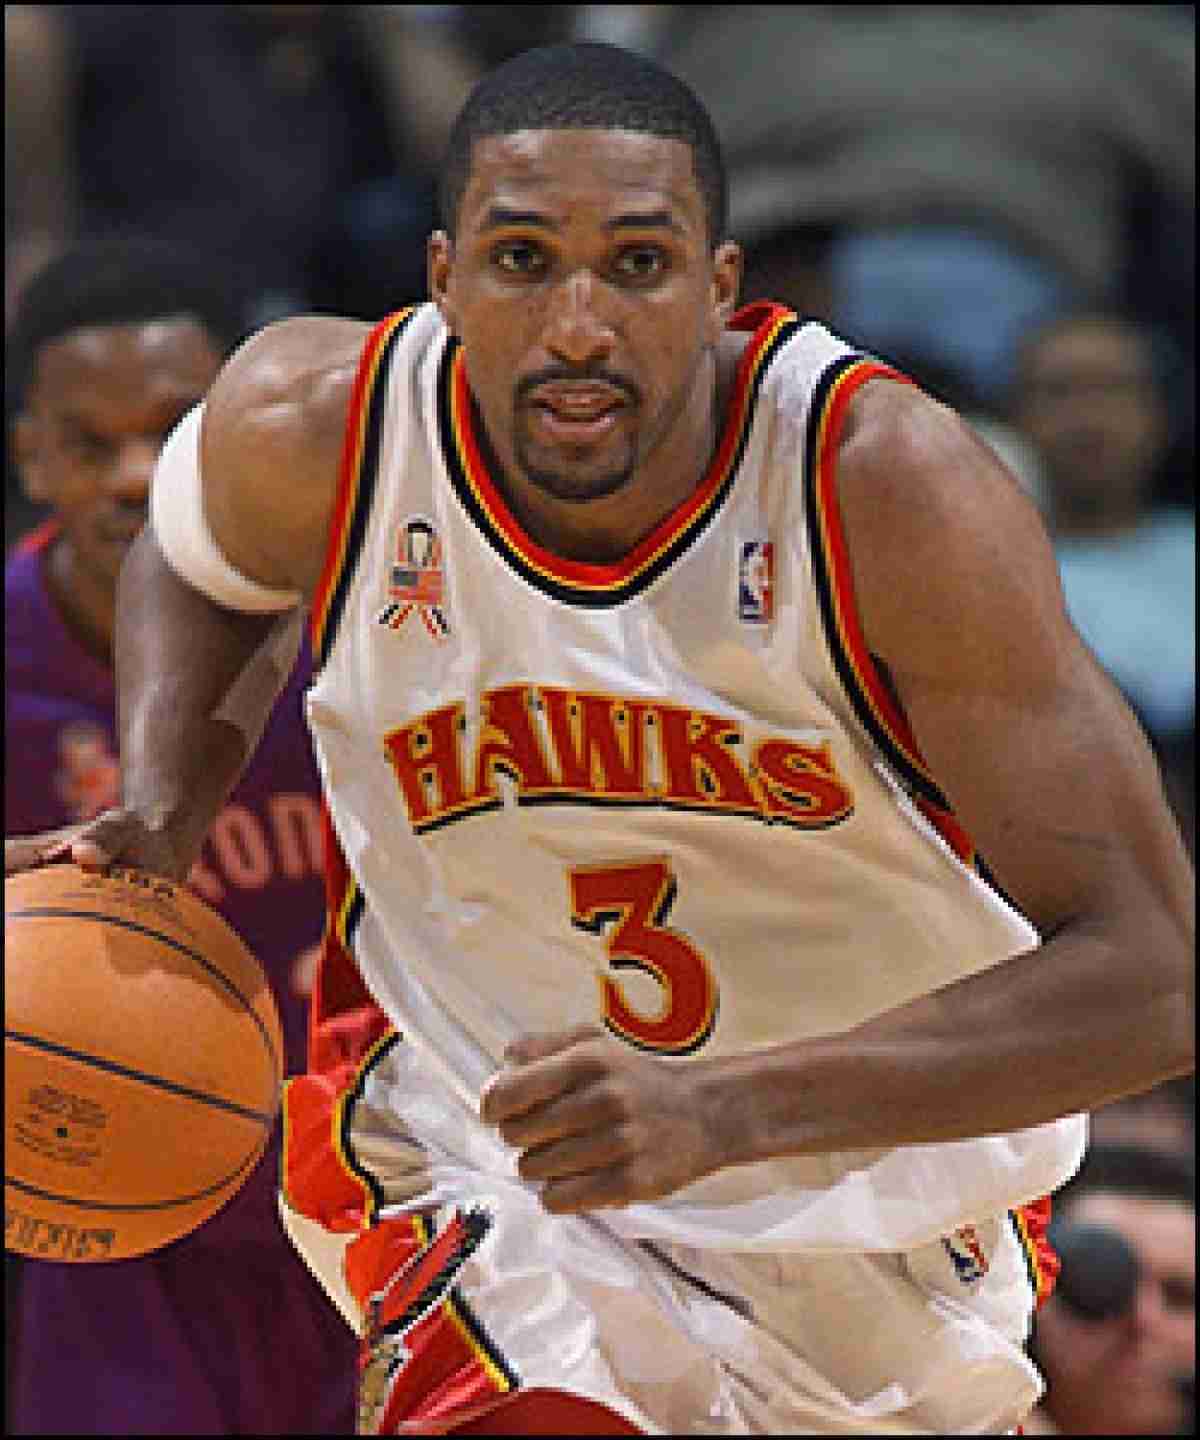 Not in Hall of Fame - 25. Shareef Abdur-Rahim